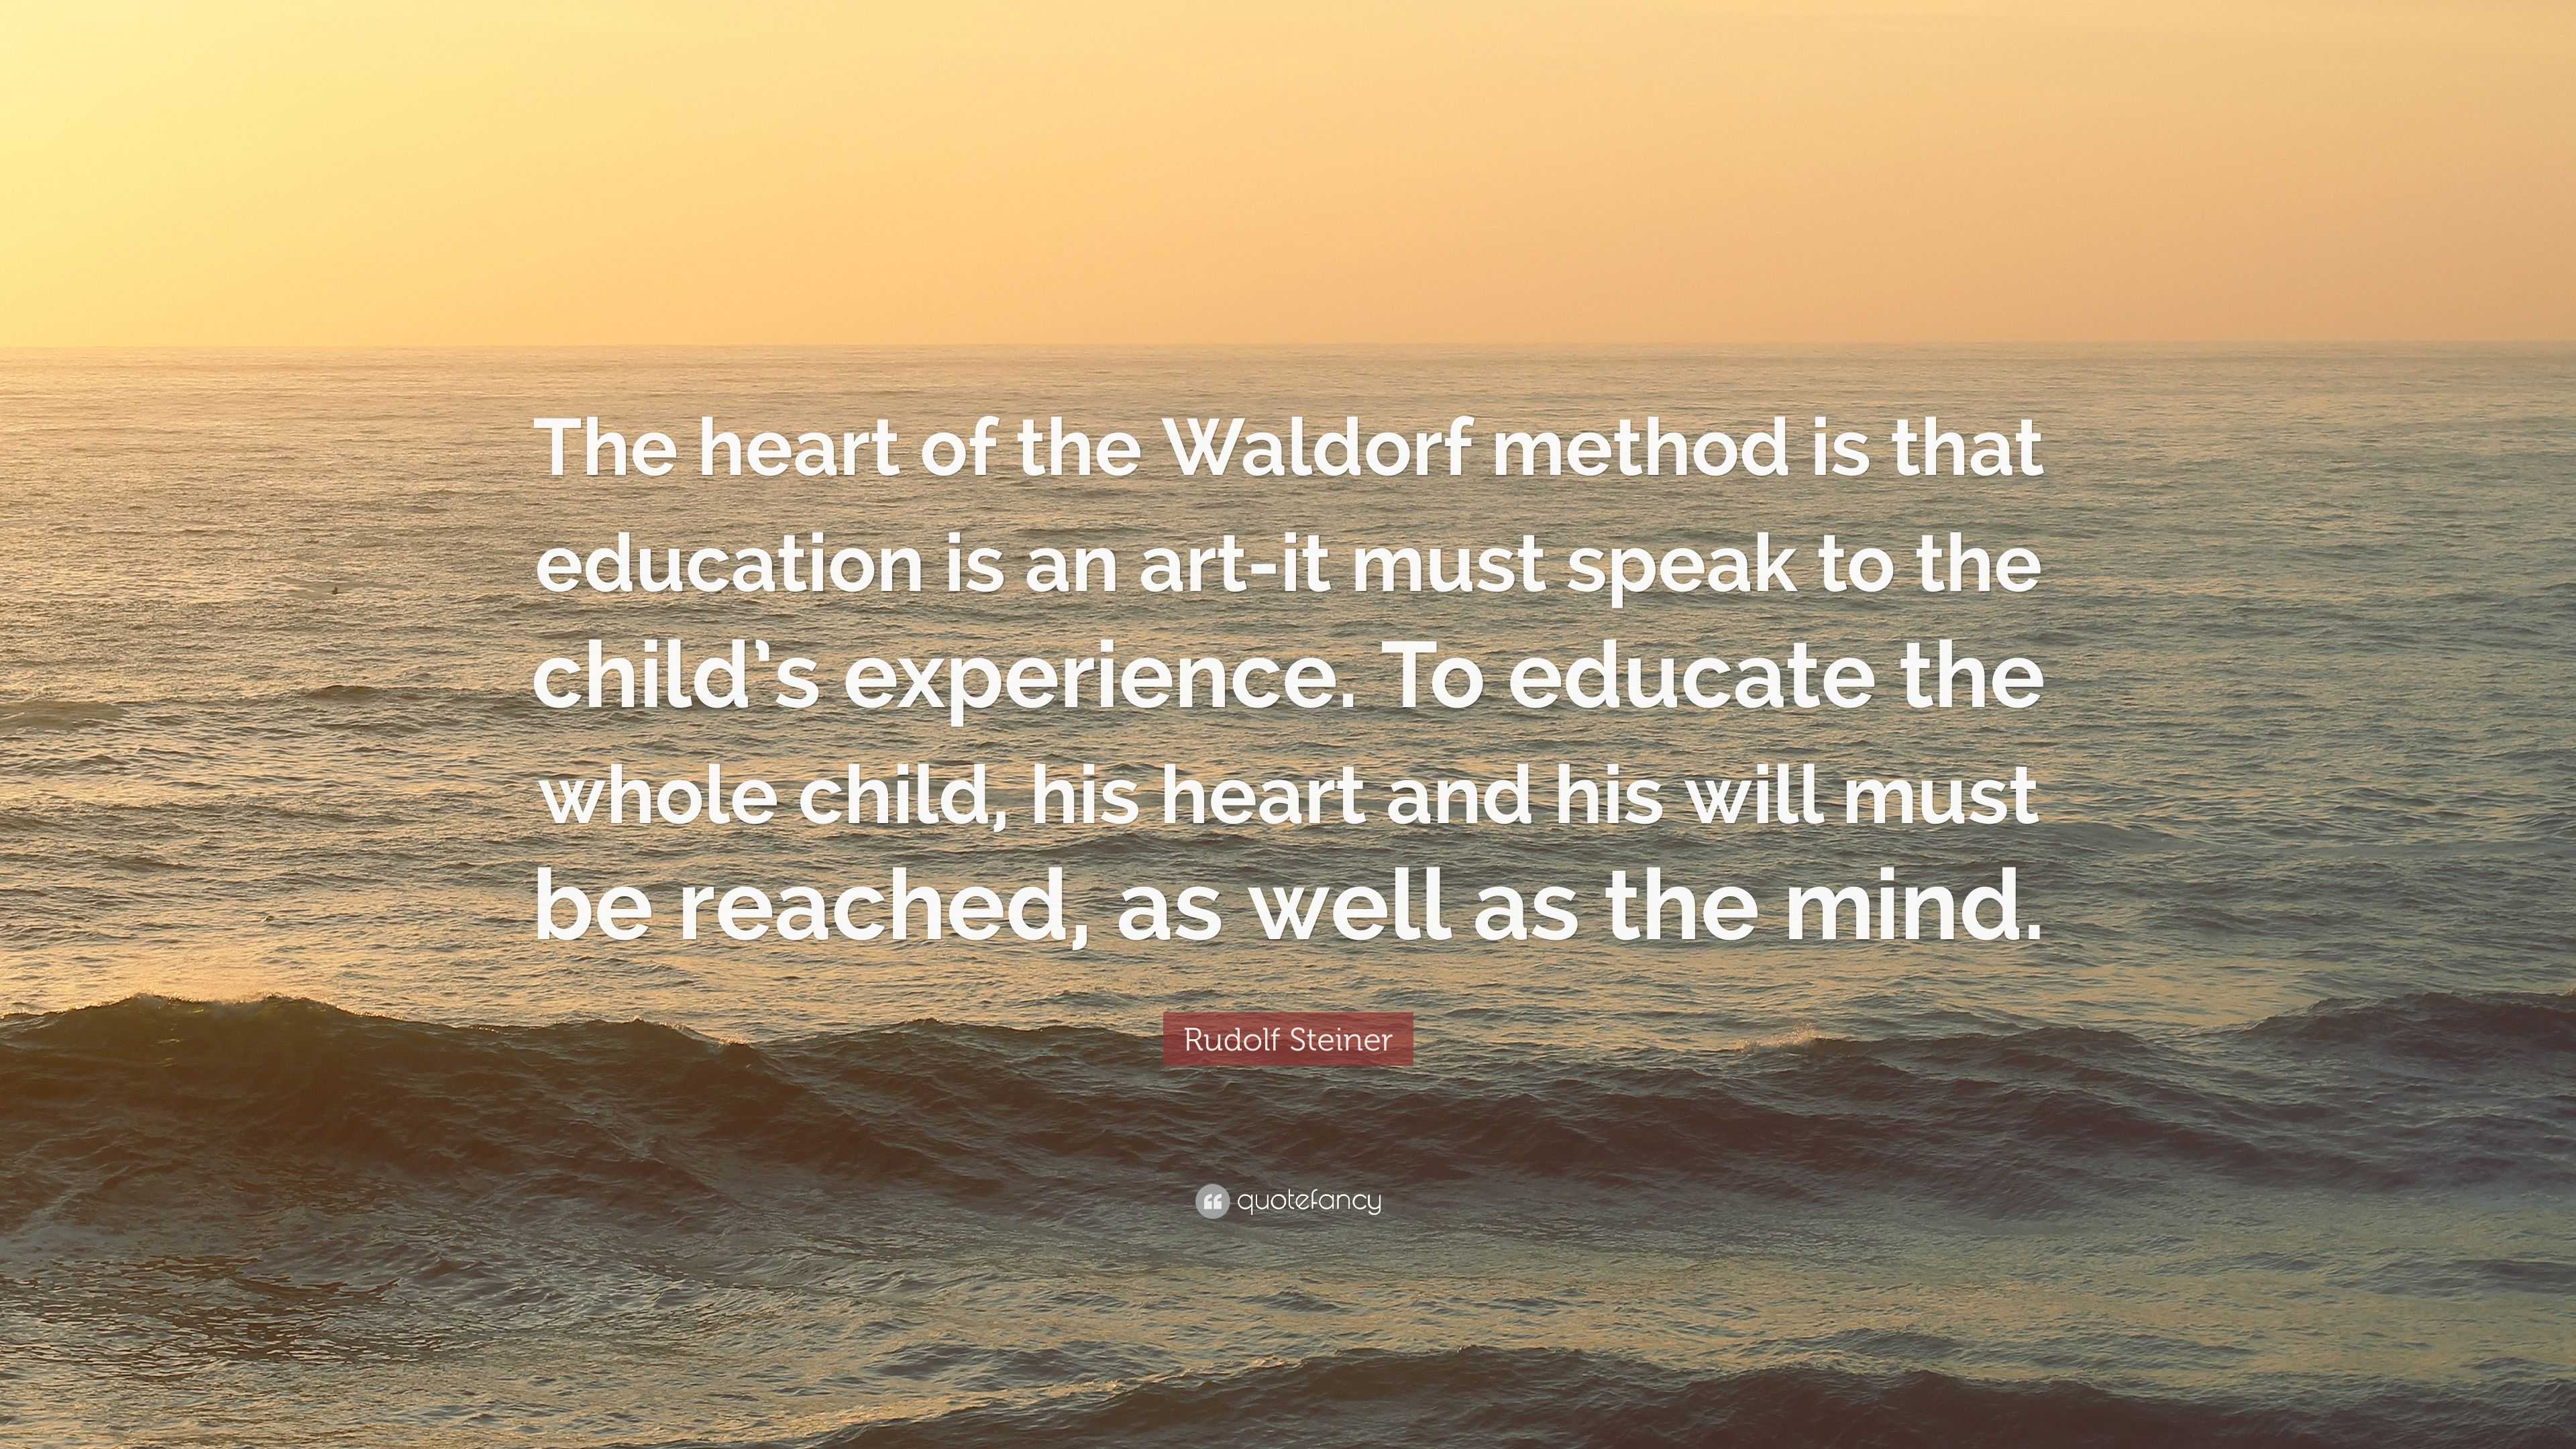 Rudolf Steiner Quote: “The heart of the Waldorf method is that ...